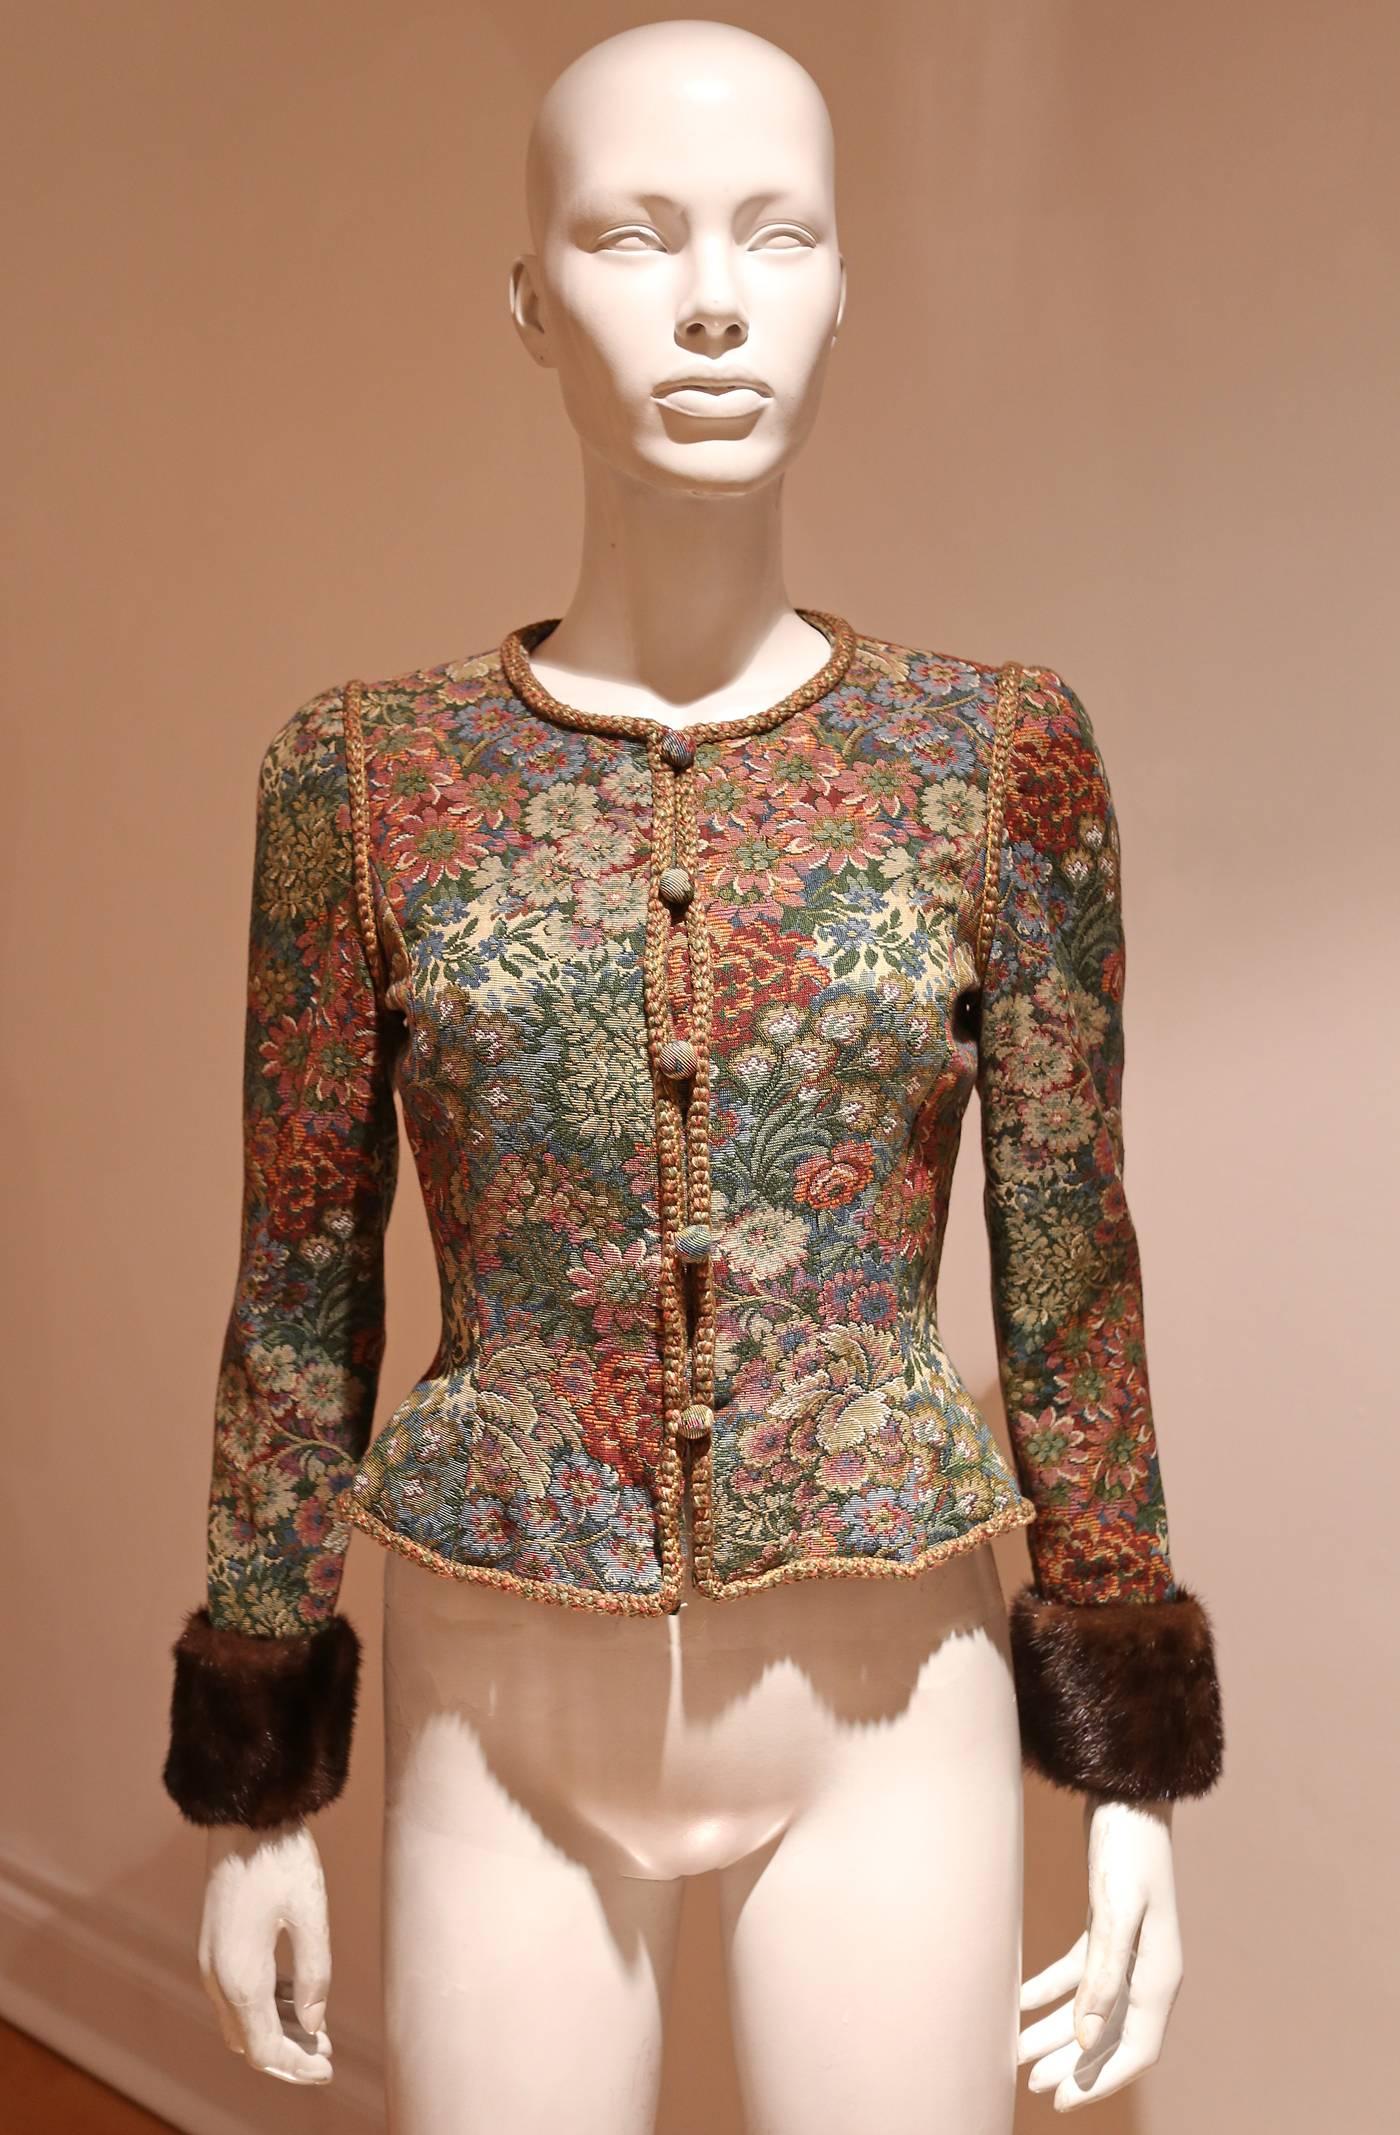 Women's Tapestry jacket with mink fur, c. 1950s